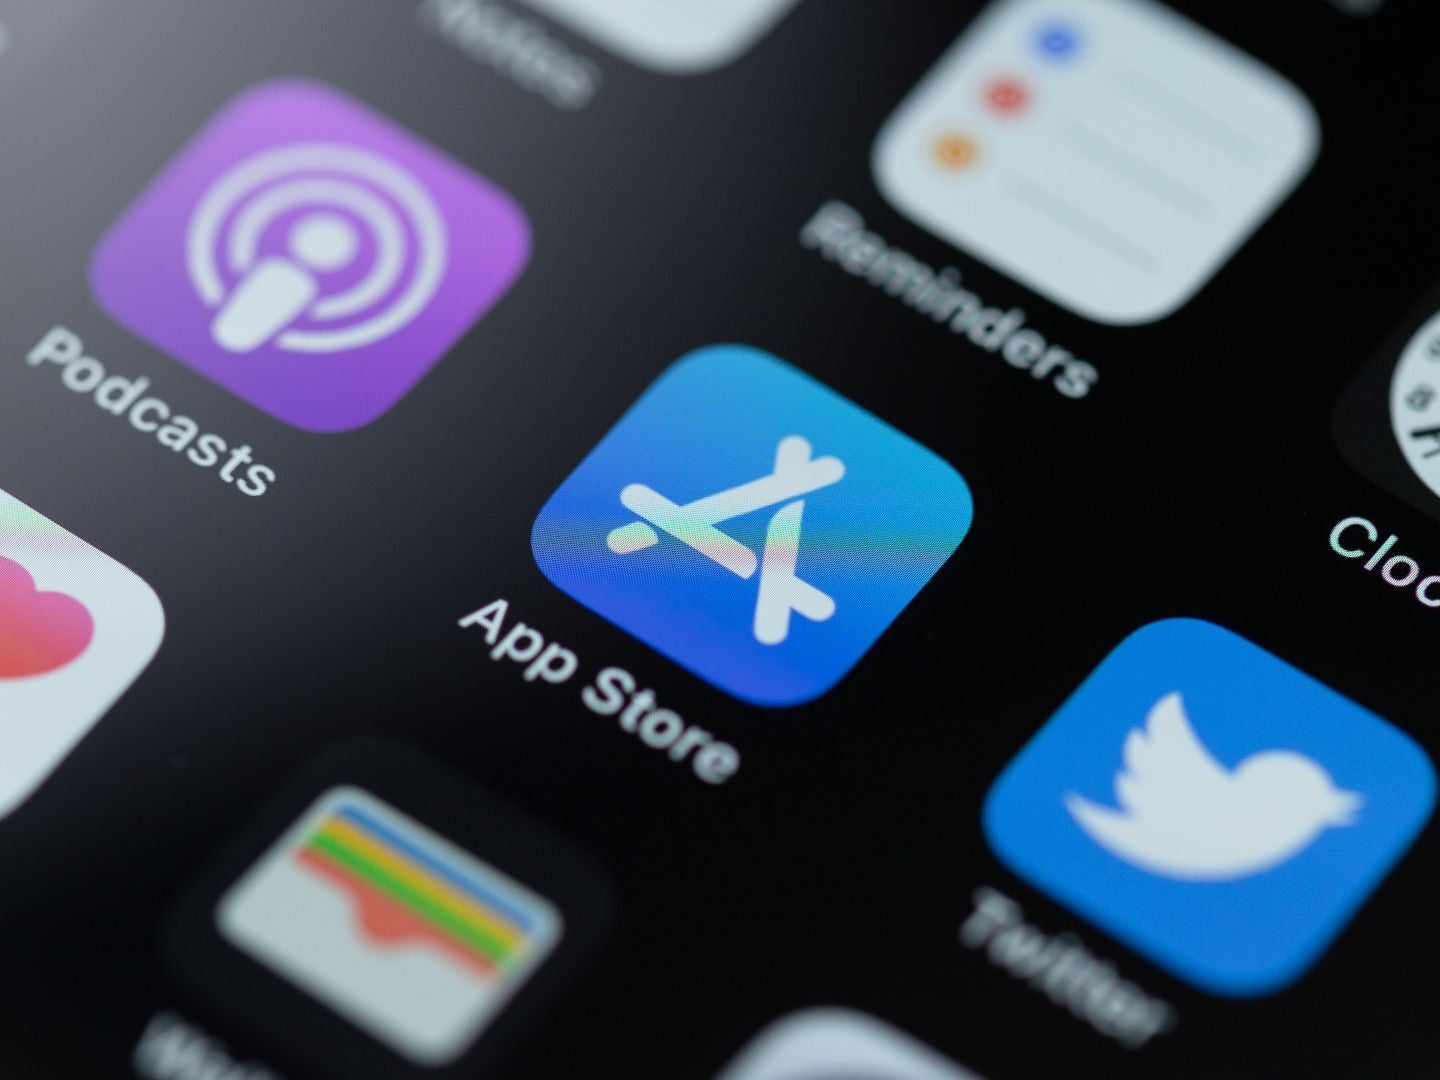 The AppStore is an opportunity to kickstart a solo dev career. - Apple is offering free upskilling sessions for AppStore developers